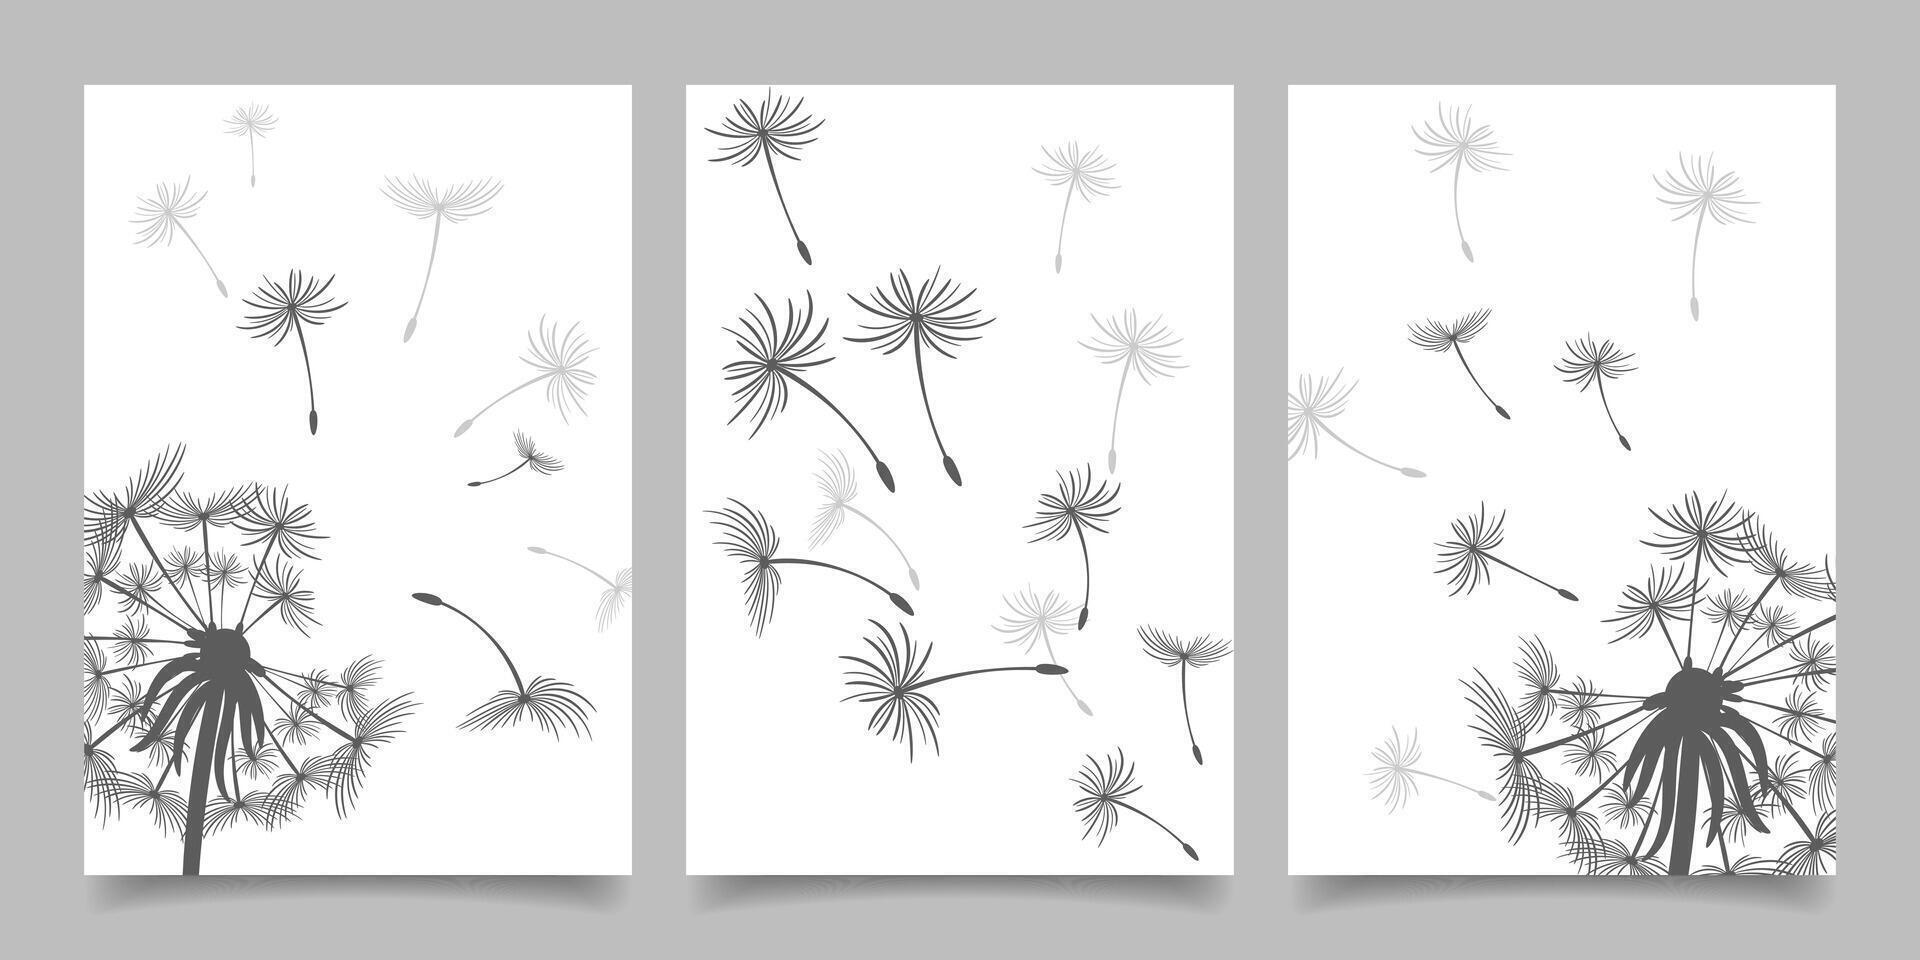 Set of cards, posters with dandelions. Black dandelion seeds fly in the wind. Collection of nature cards. Vector